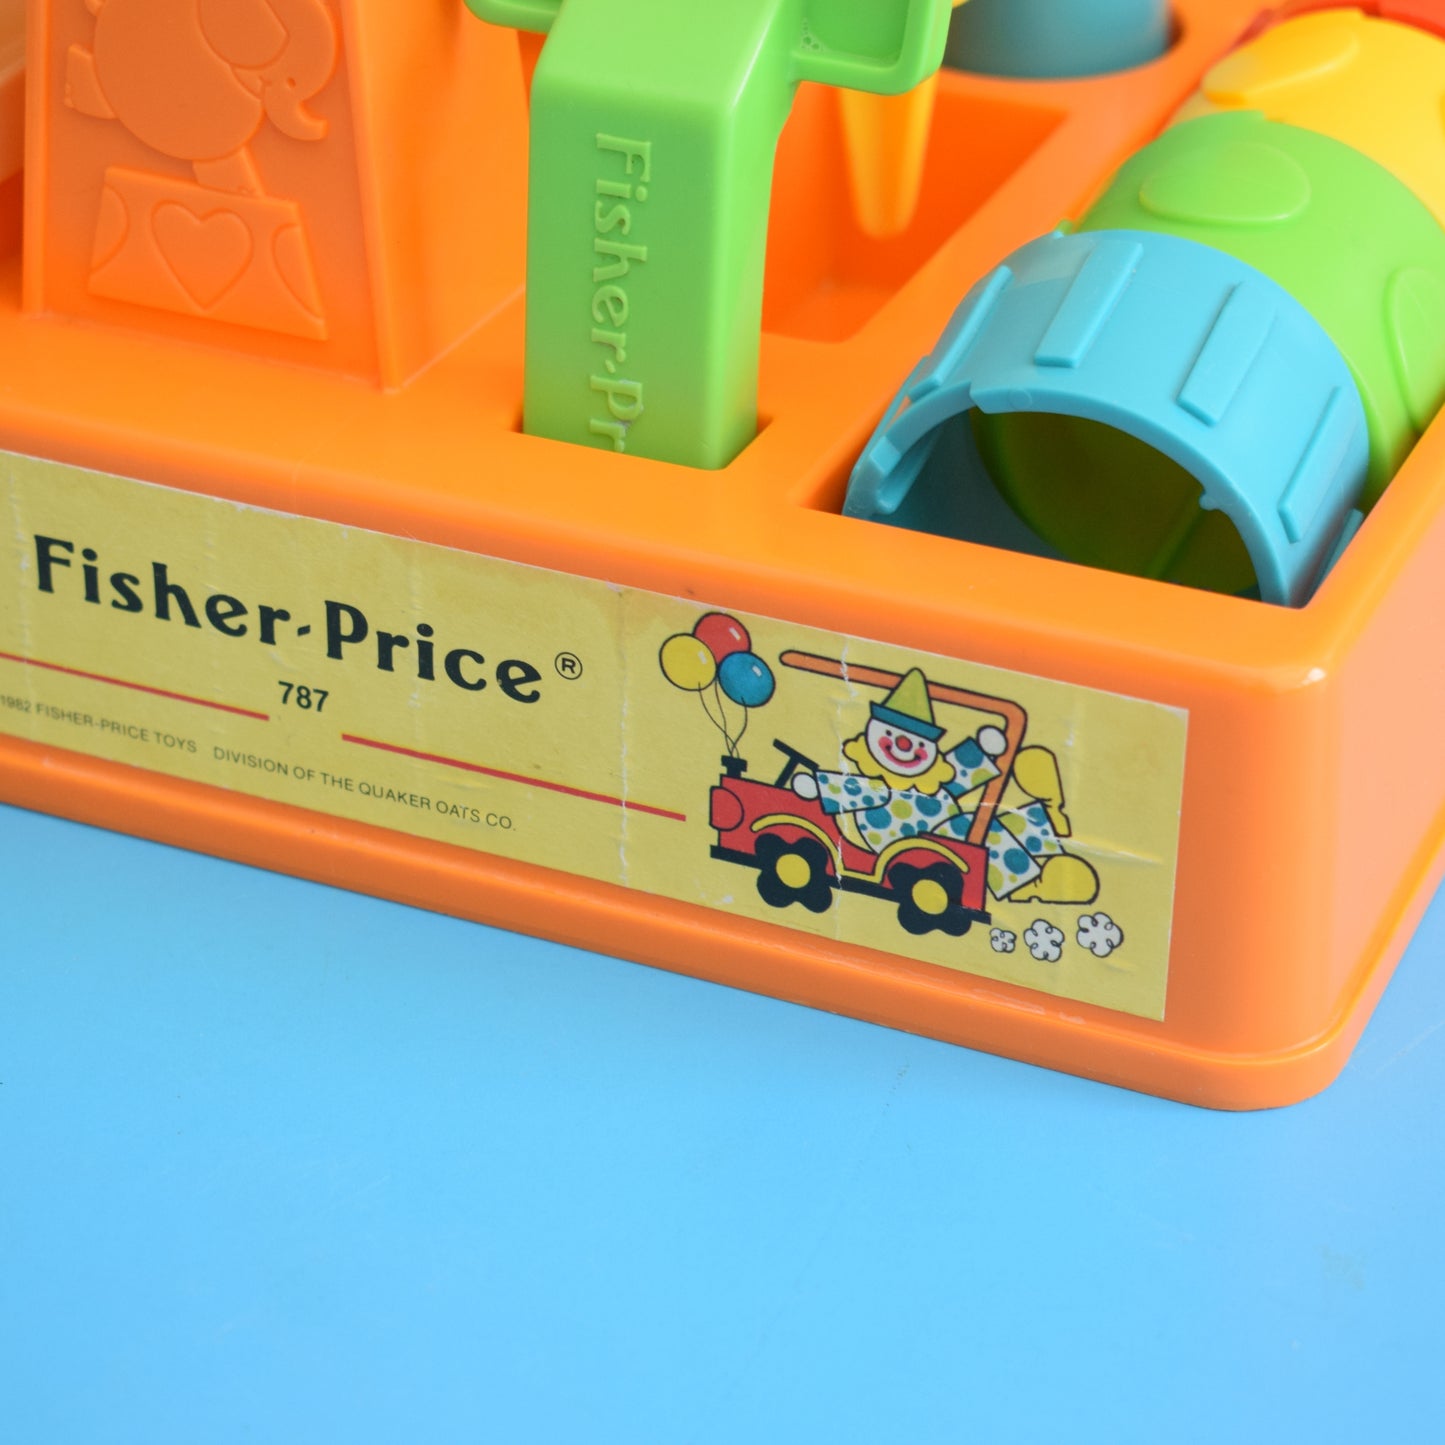 Vintage 1980s Fisher Price Play Modeling Set